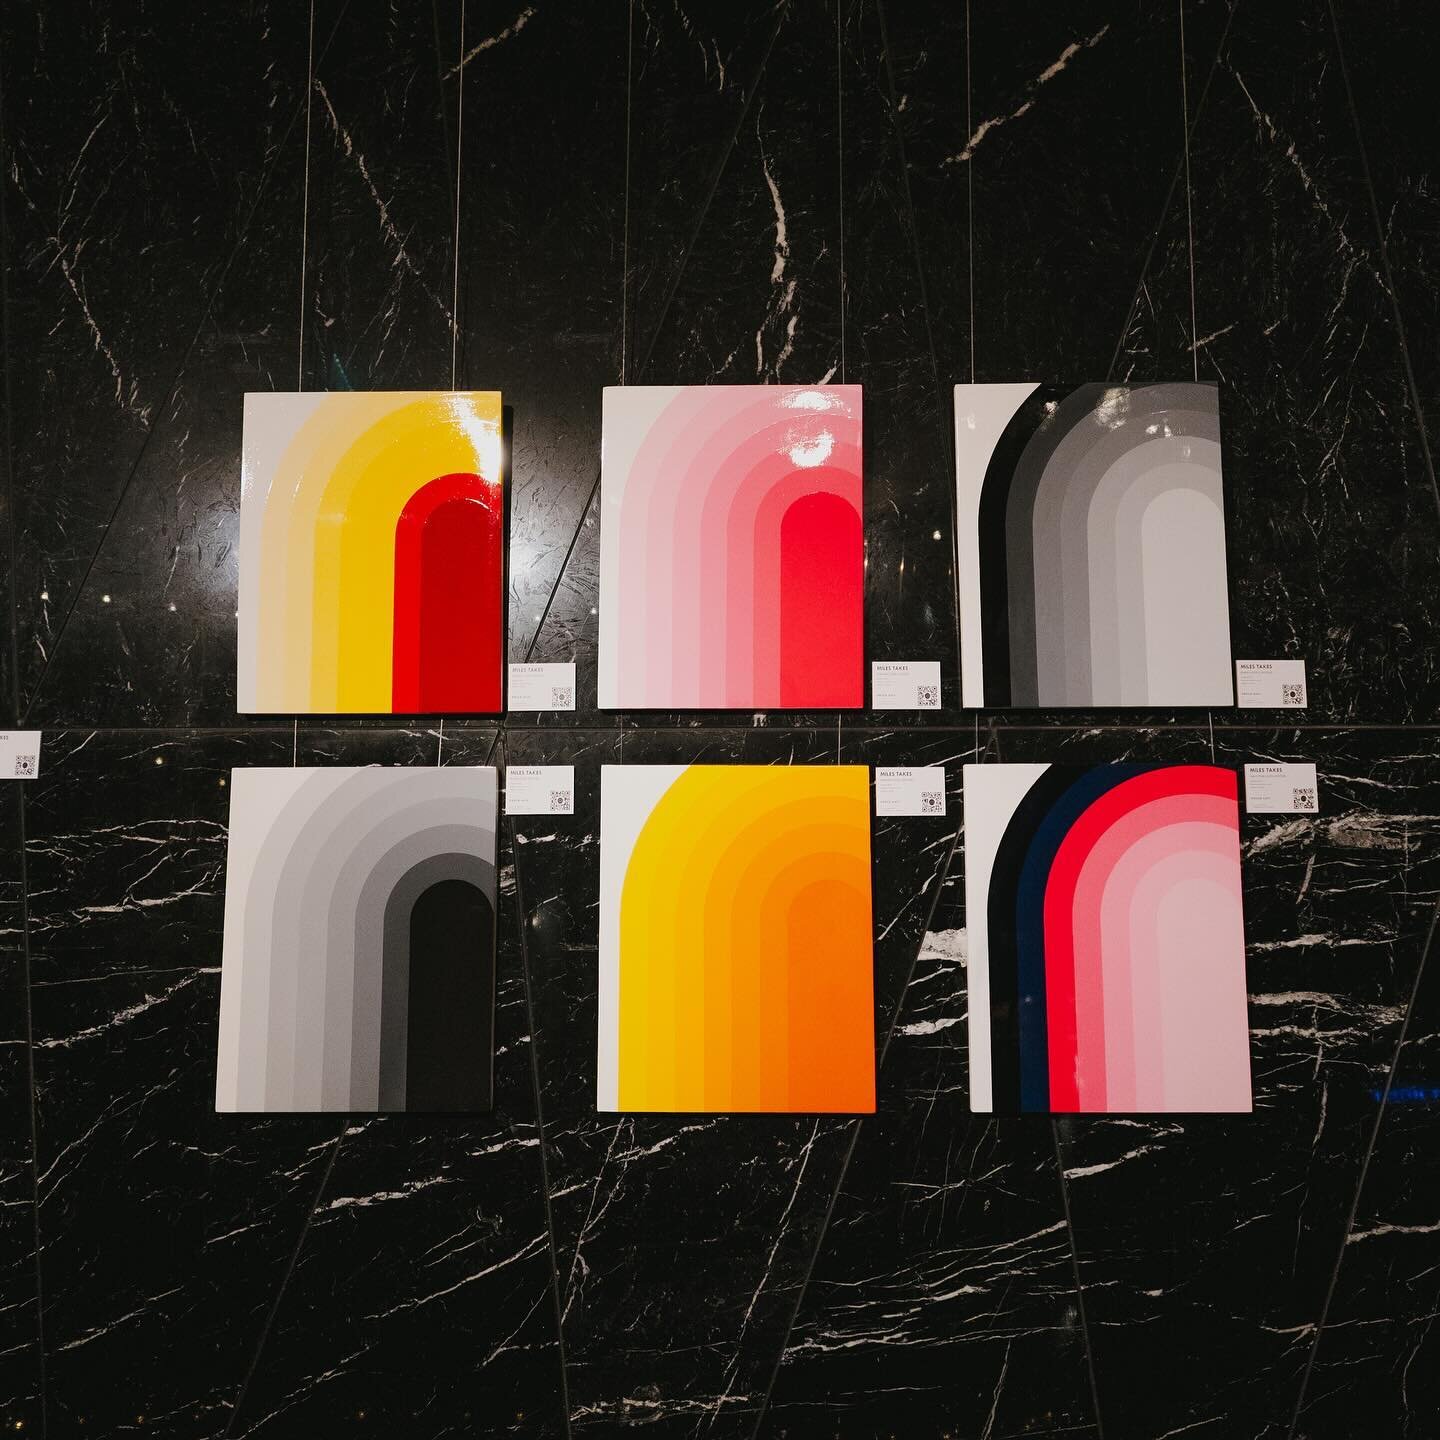 New LOOP SERIES from MOMENTS by @milestakes at @melondonhotel available to buy on www.gonerogueldn.com or Link in bio

Fuchsia Loop, Untitled
Orange Loop, Untitled
Grey Loop, Untitled
Yellow Loop, Untitled
Black Loop, Untitled

50.8 x 40.5 unframed |